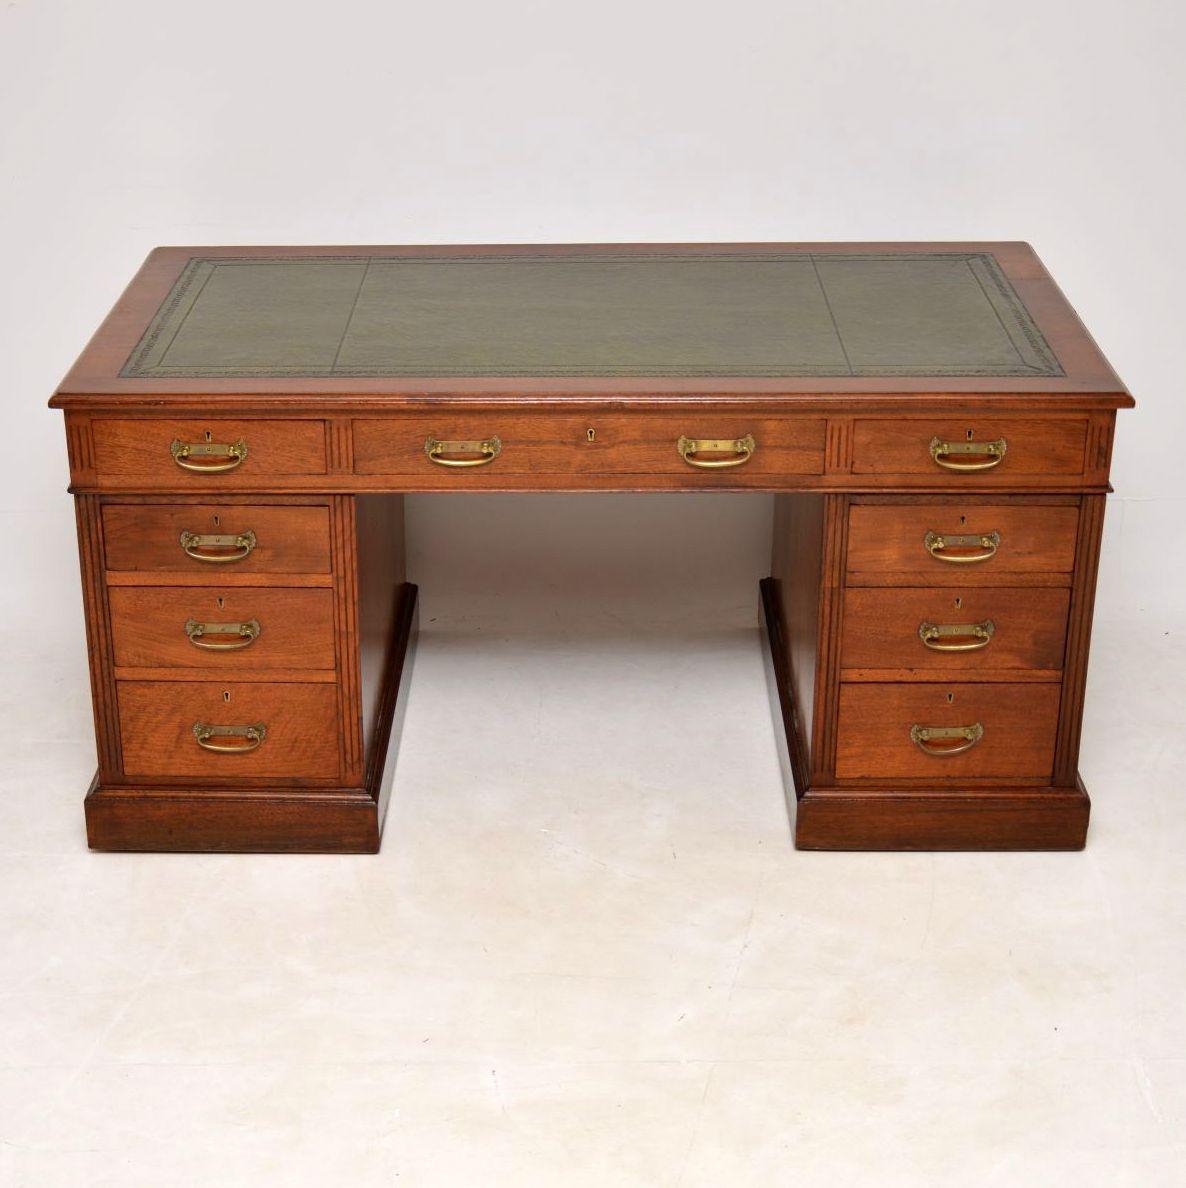 Large antique Victorian walnut pedestal desk with a tooled leather writing surface, a polished paneled back & sitting on plinth bases. It’s in very good condition, having just been French polished & dates to circa 1880s period. All the drawers have